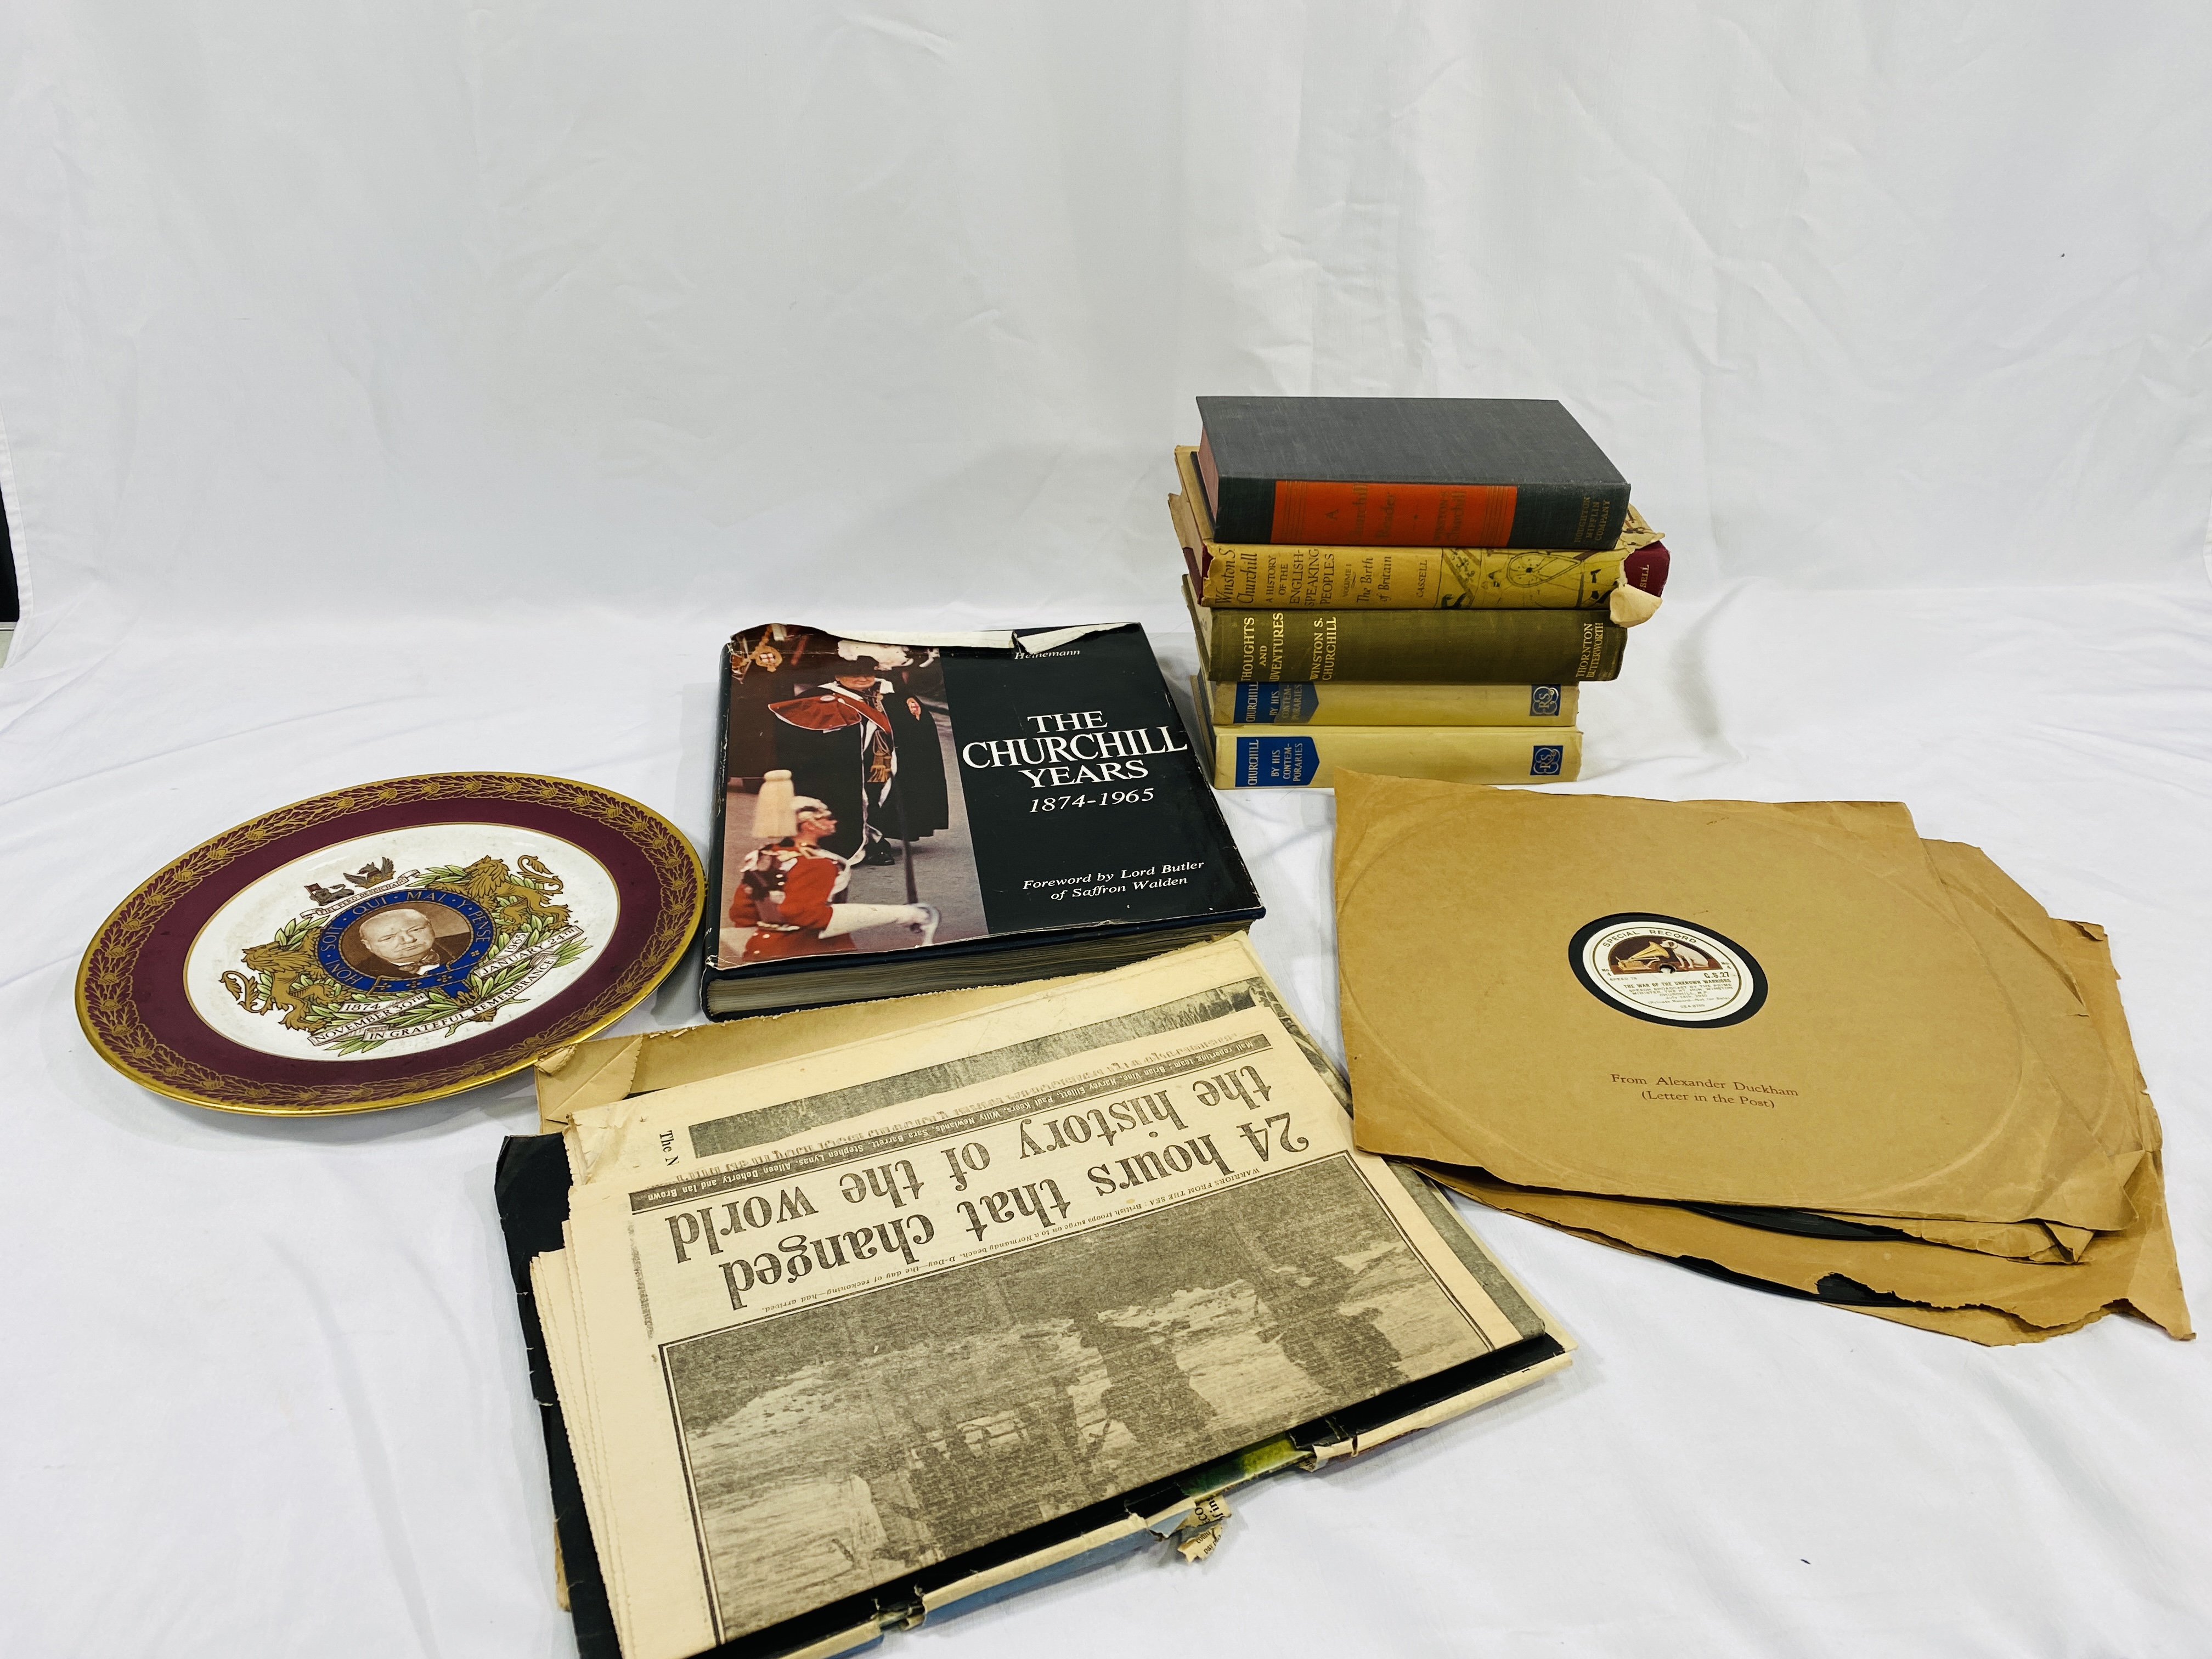 Winston Churchill: 'Thoughts and Adventures', 1st edition, 1932; with other memorabilia